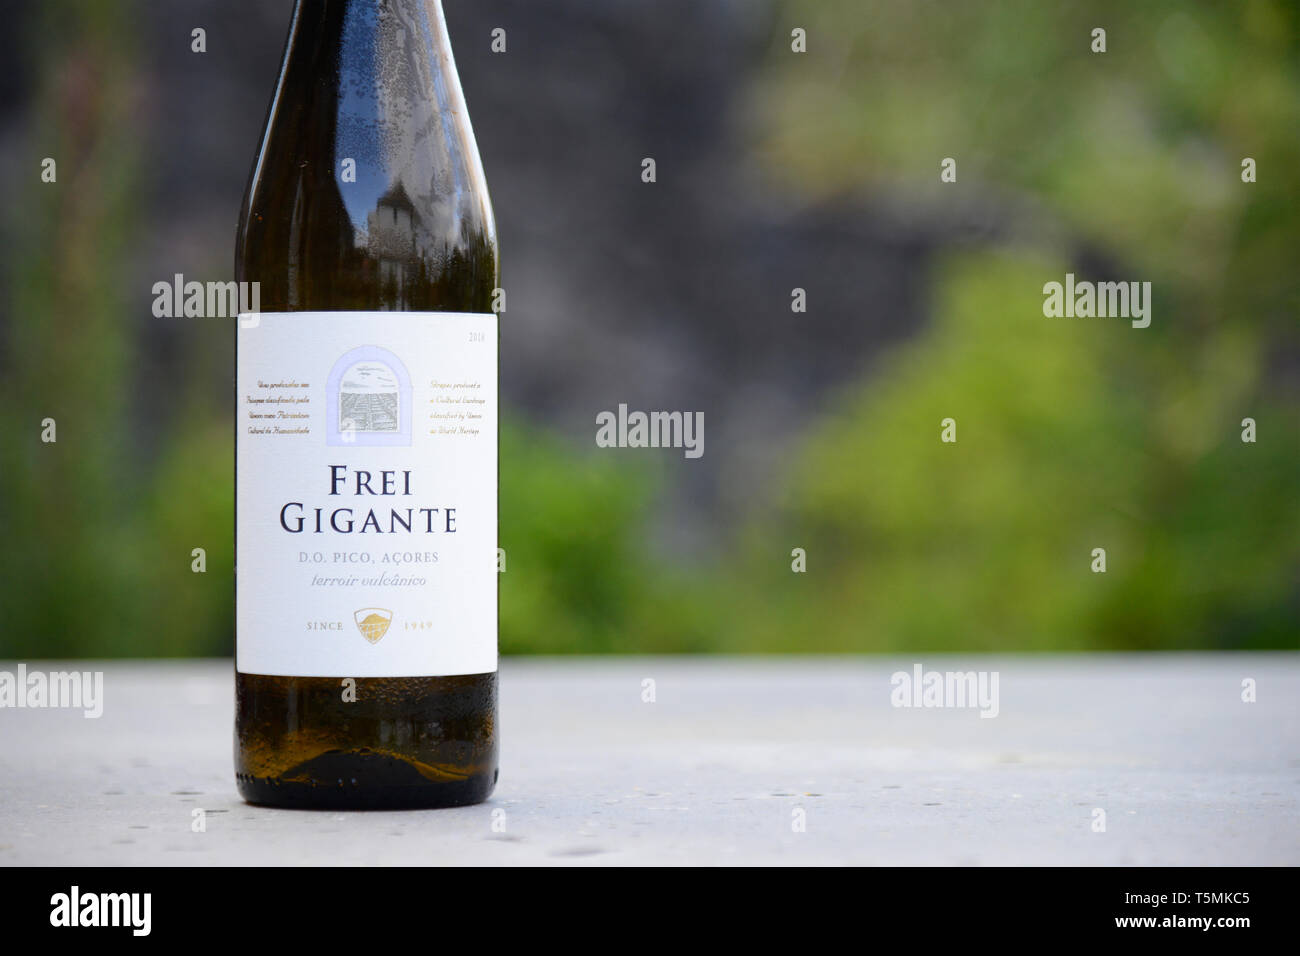 AZORES, PORTUGAL - APRIL 19, 2019: A bottle of white Frei Gigante wine sits on a table  in Pico Island, Azores. A typical wine from Pico Island in Azo Stock Photo